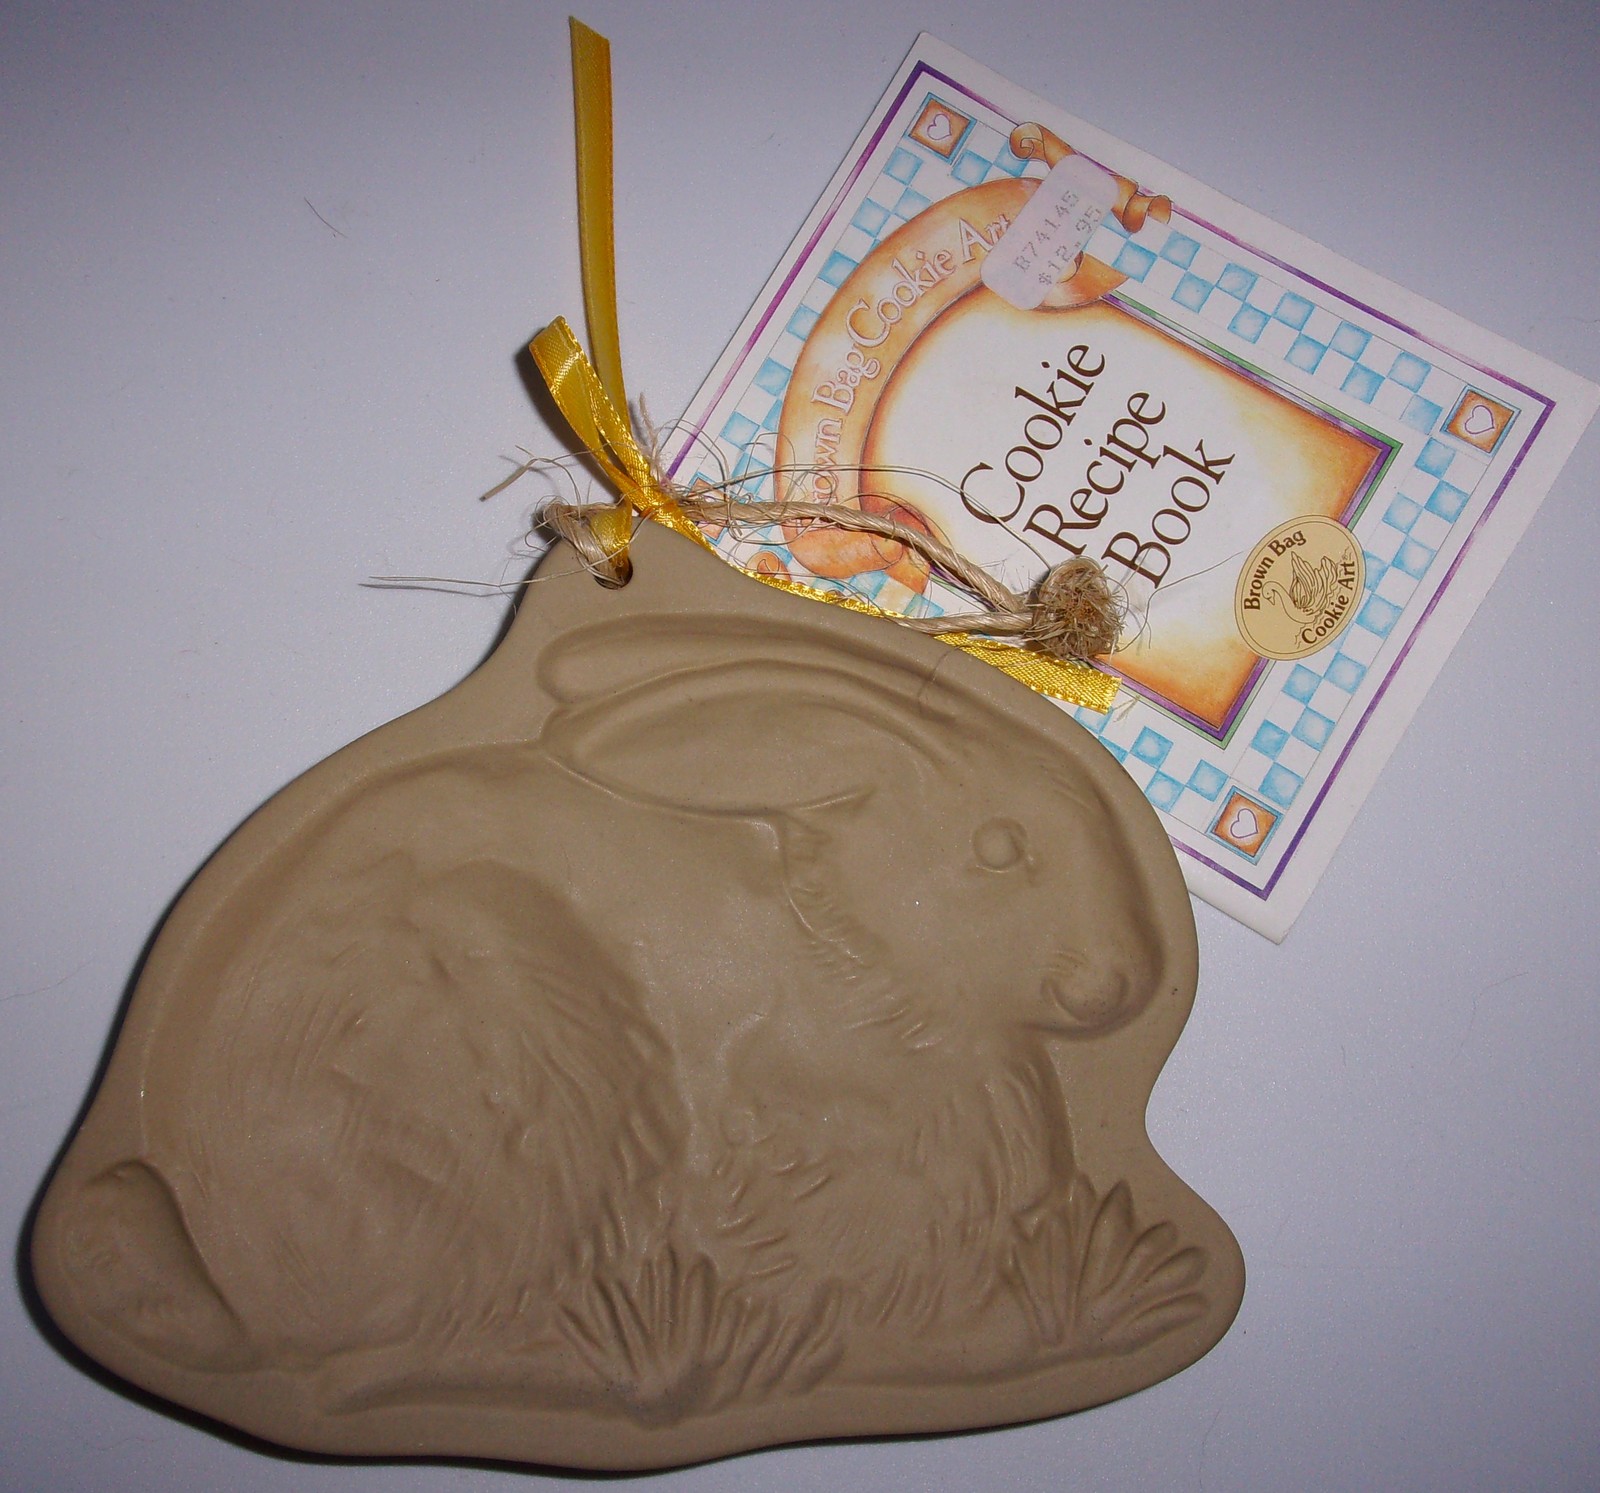 Brown Bag Cookie Art Bunny Mold New With Cookie Recipe Book 1988 - $8.99